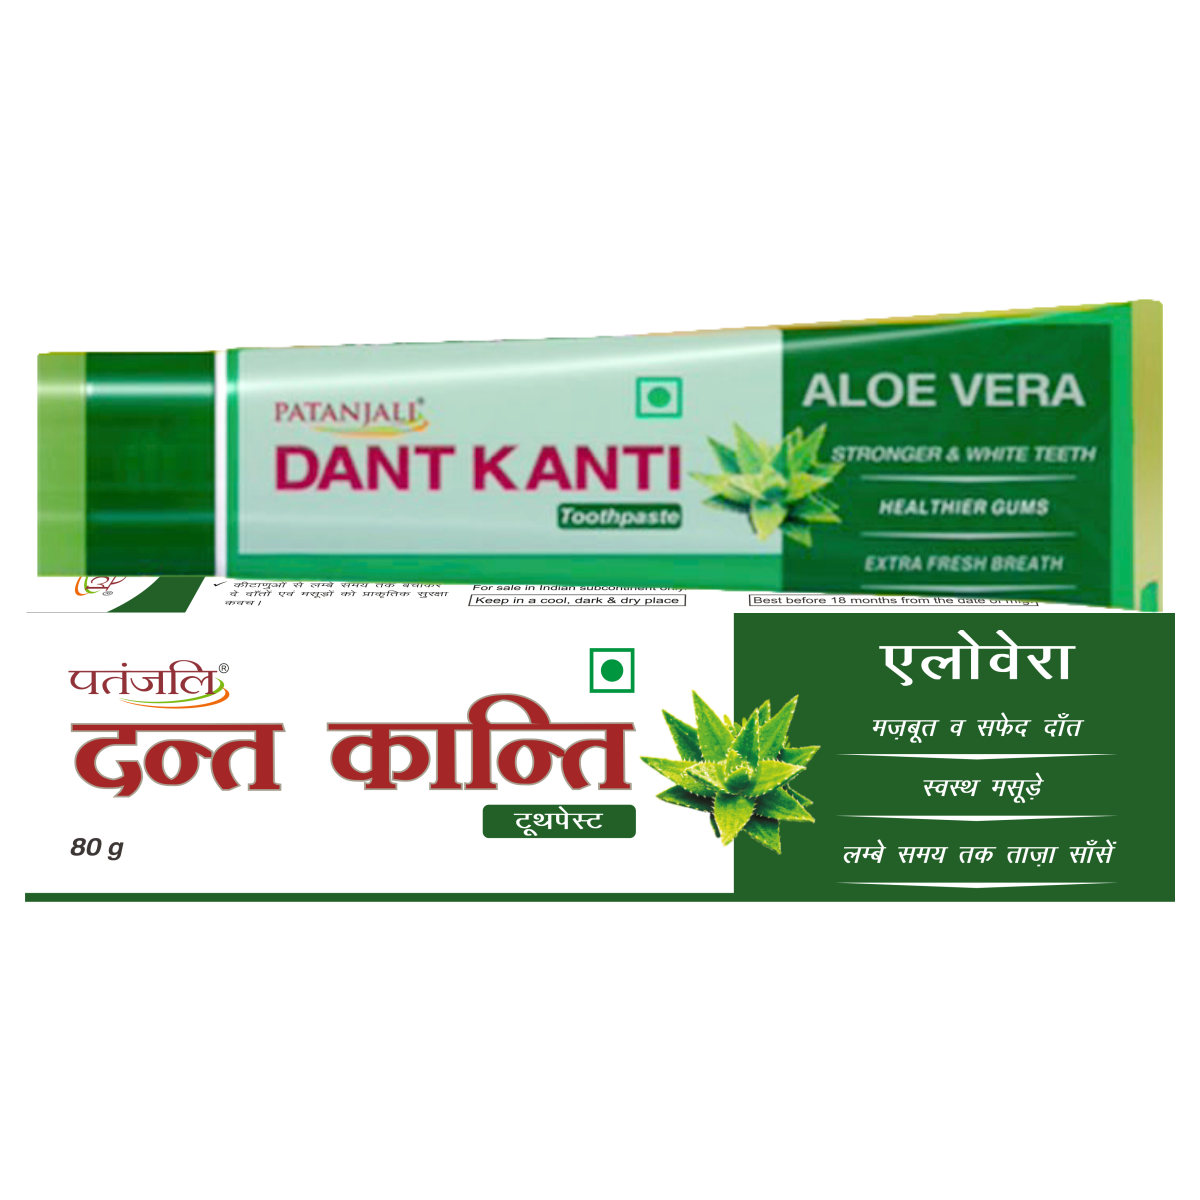 Patanjali Dant Kanti Toothpaste with toothbrush 200 g - Buy Online